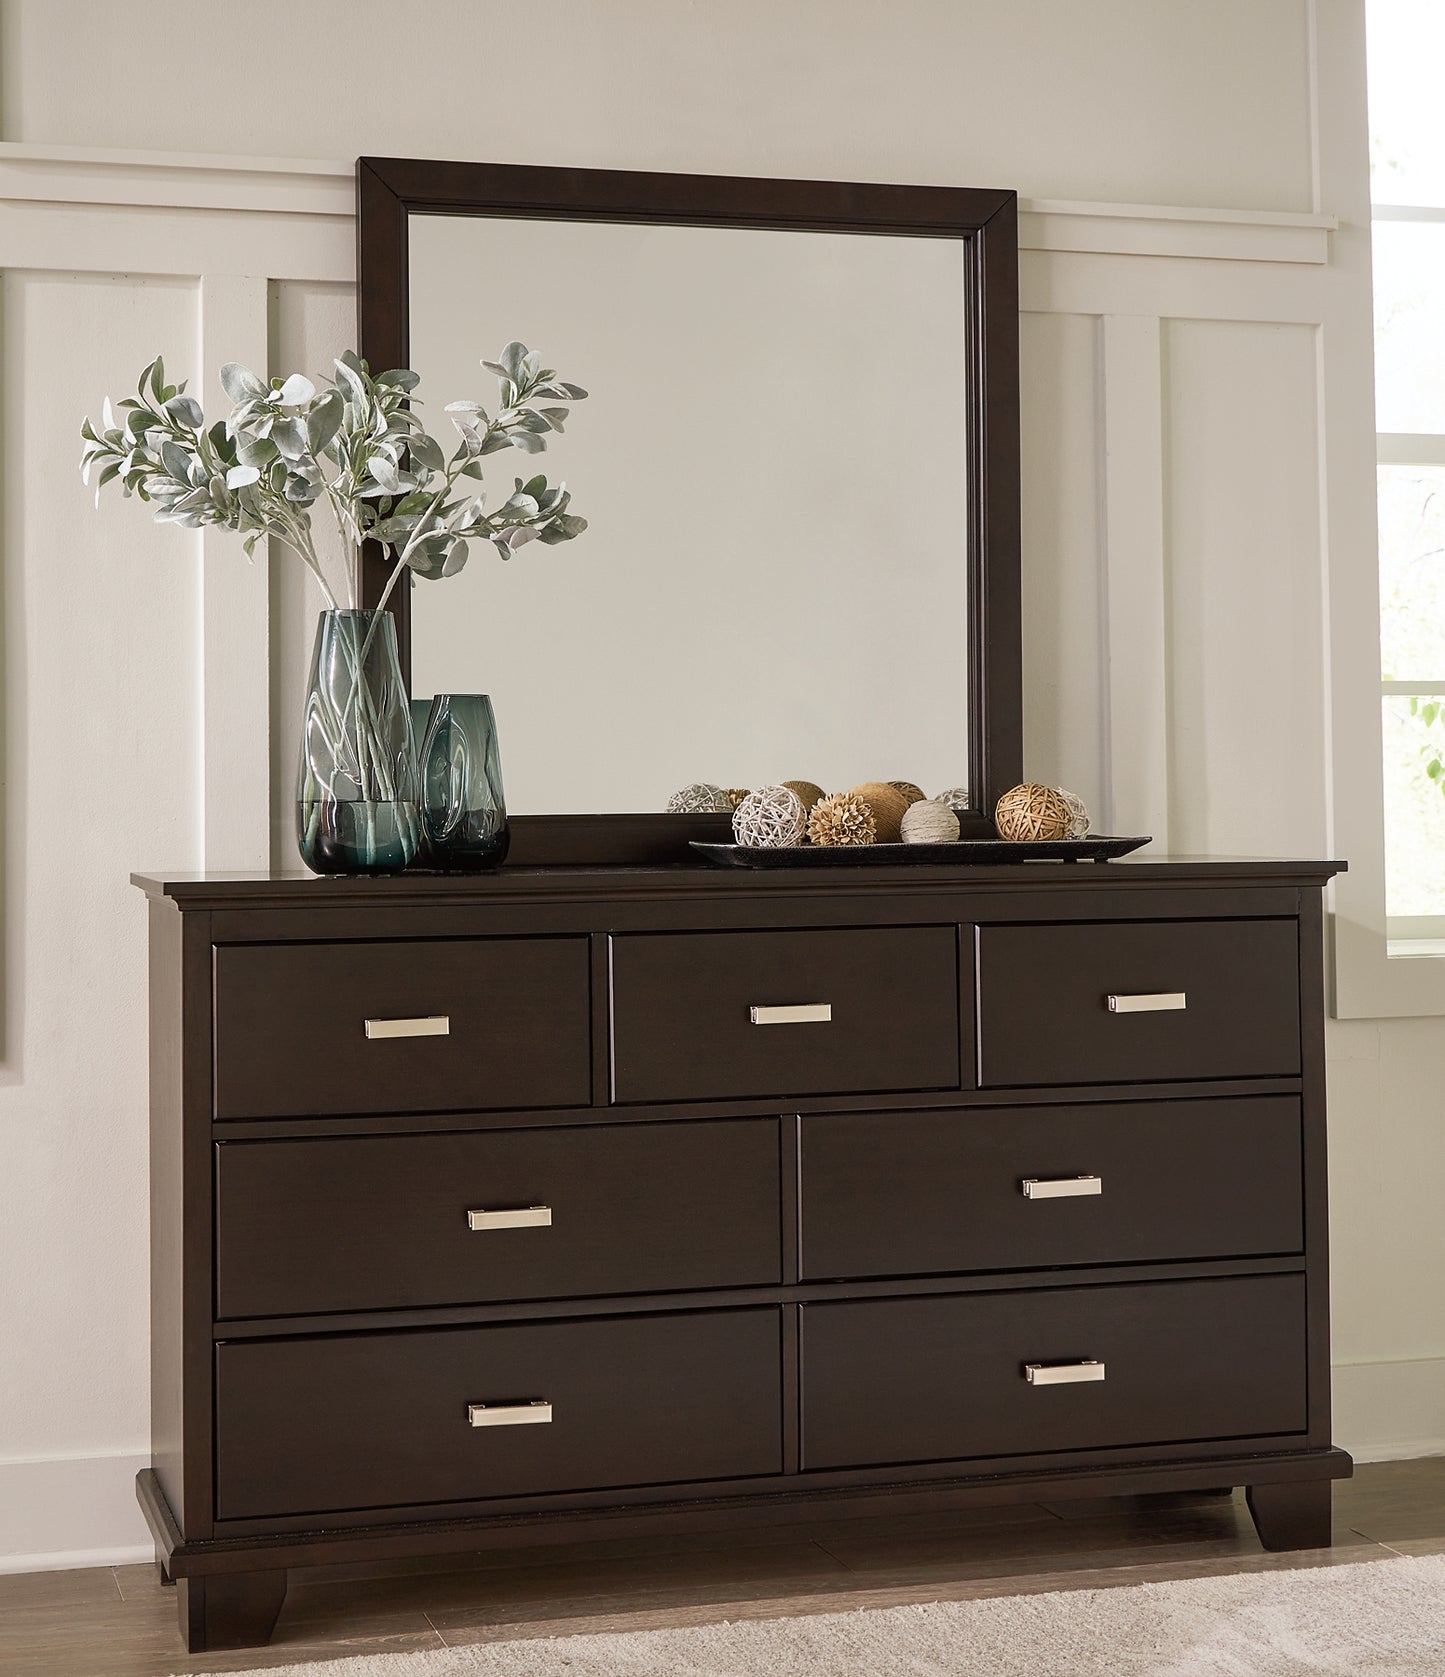 Covetown King Panel Bed with Mirrored Dresser